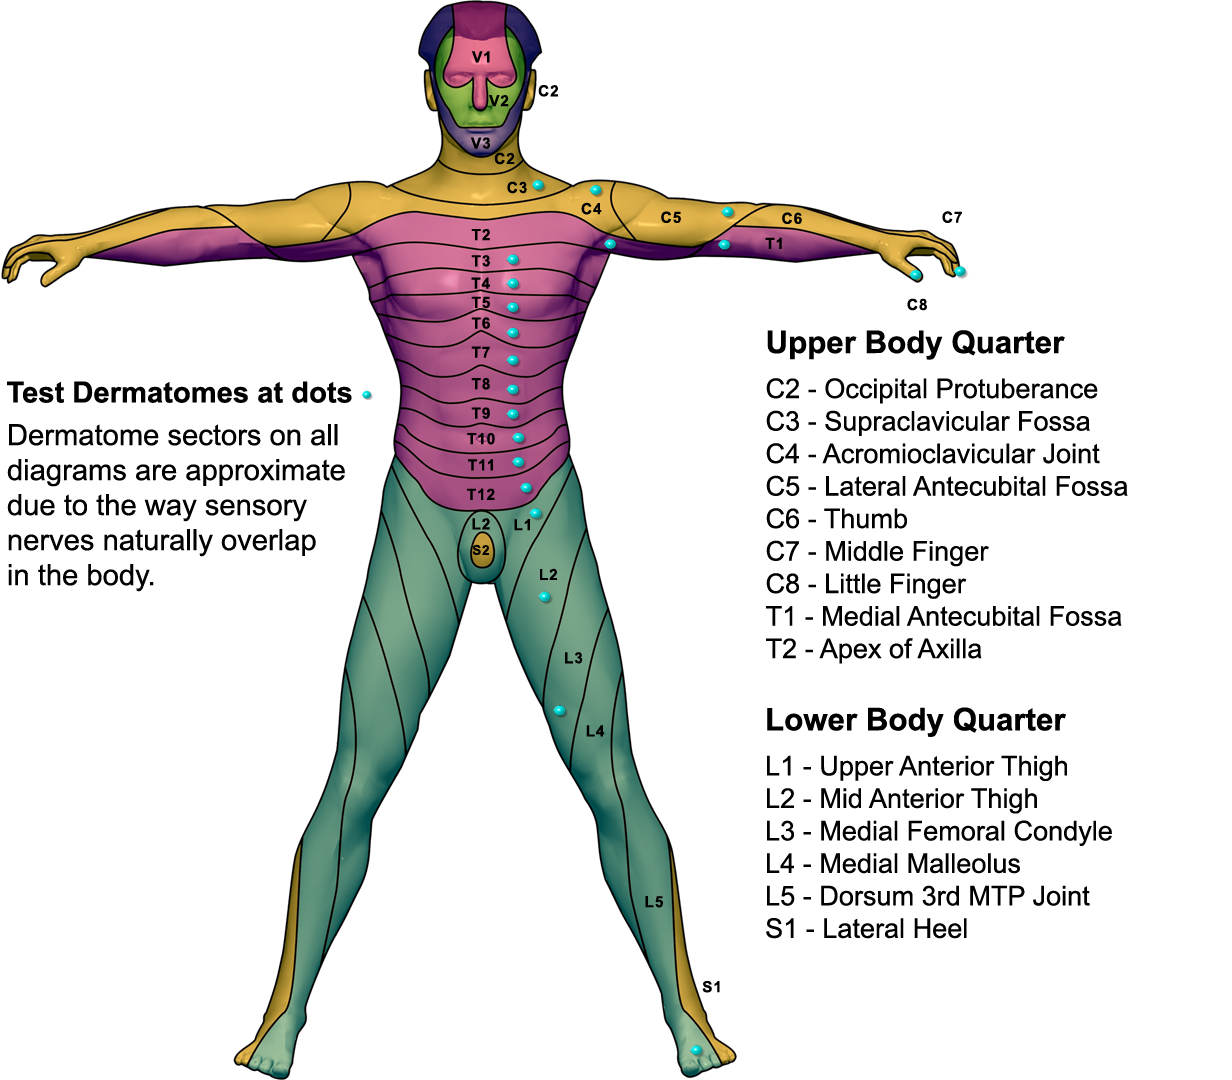 Related image of L4 Dermatome Map.